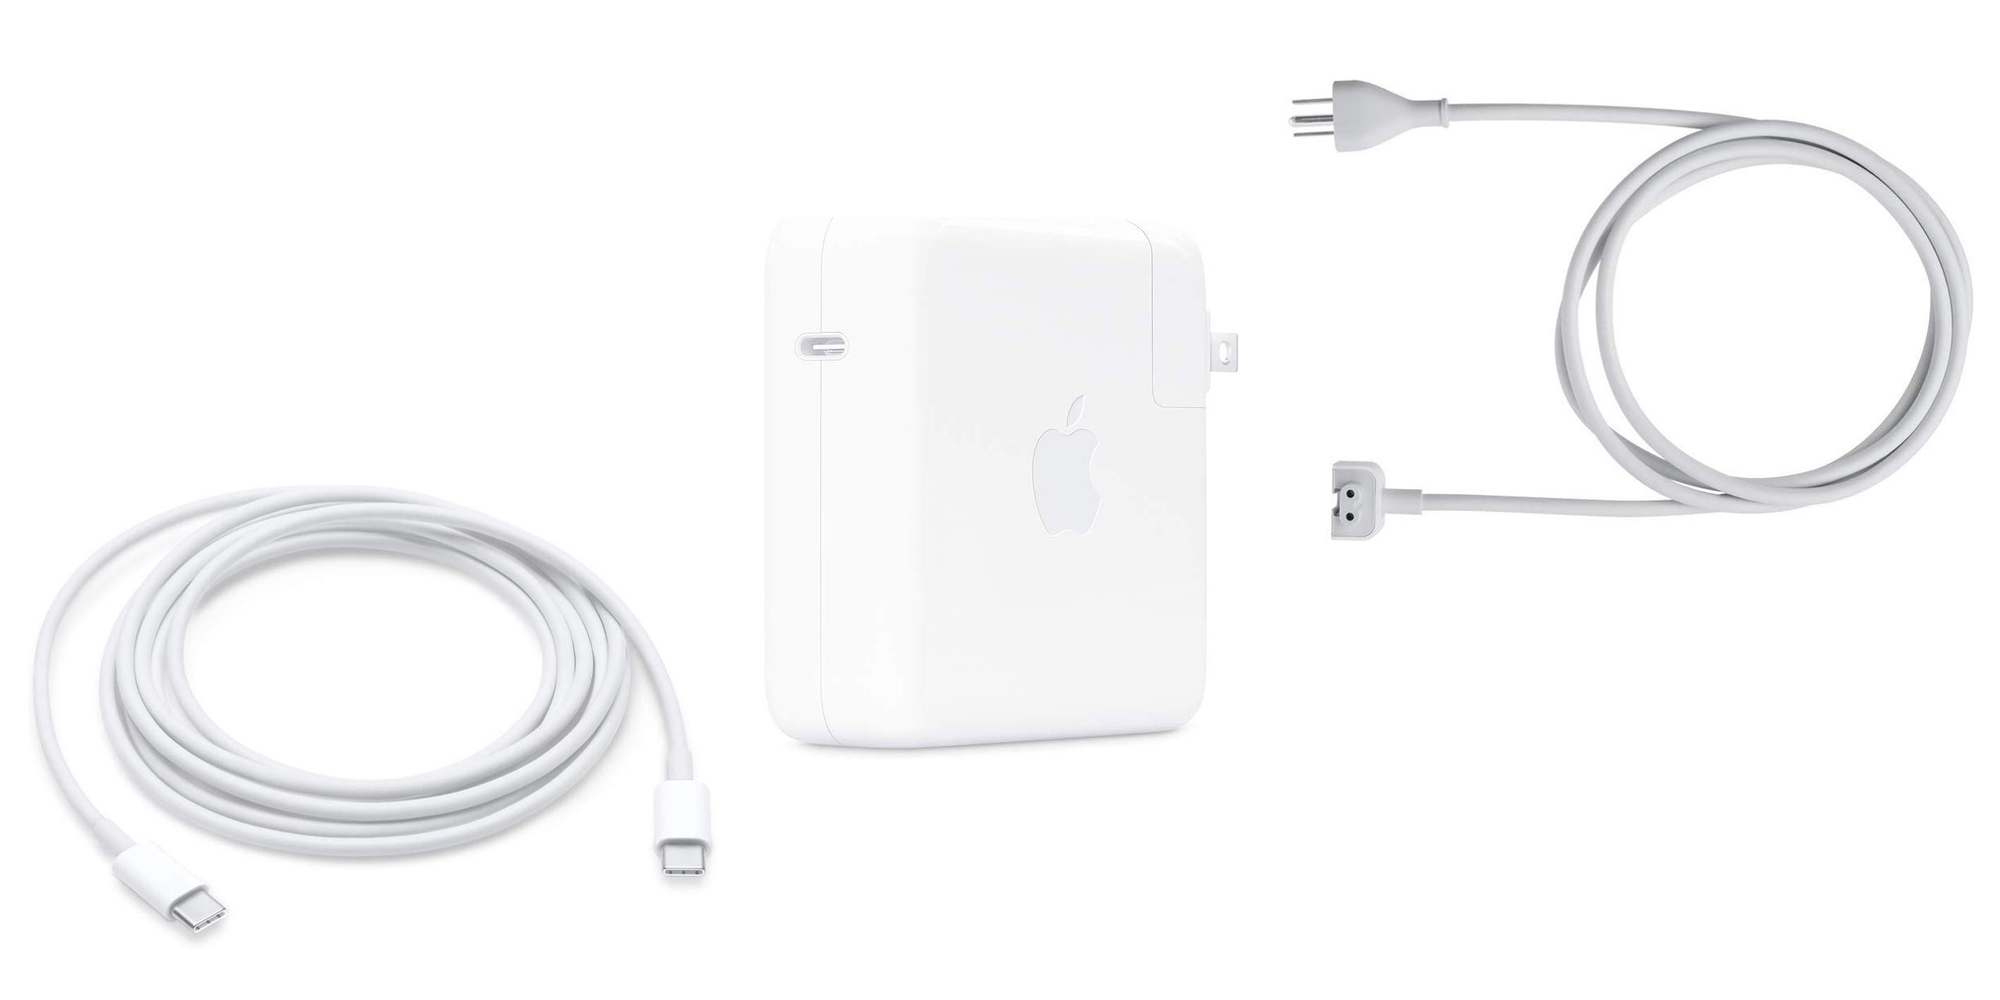 2015 macbook pro charger wattage